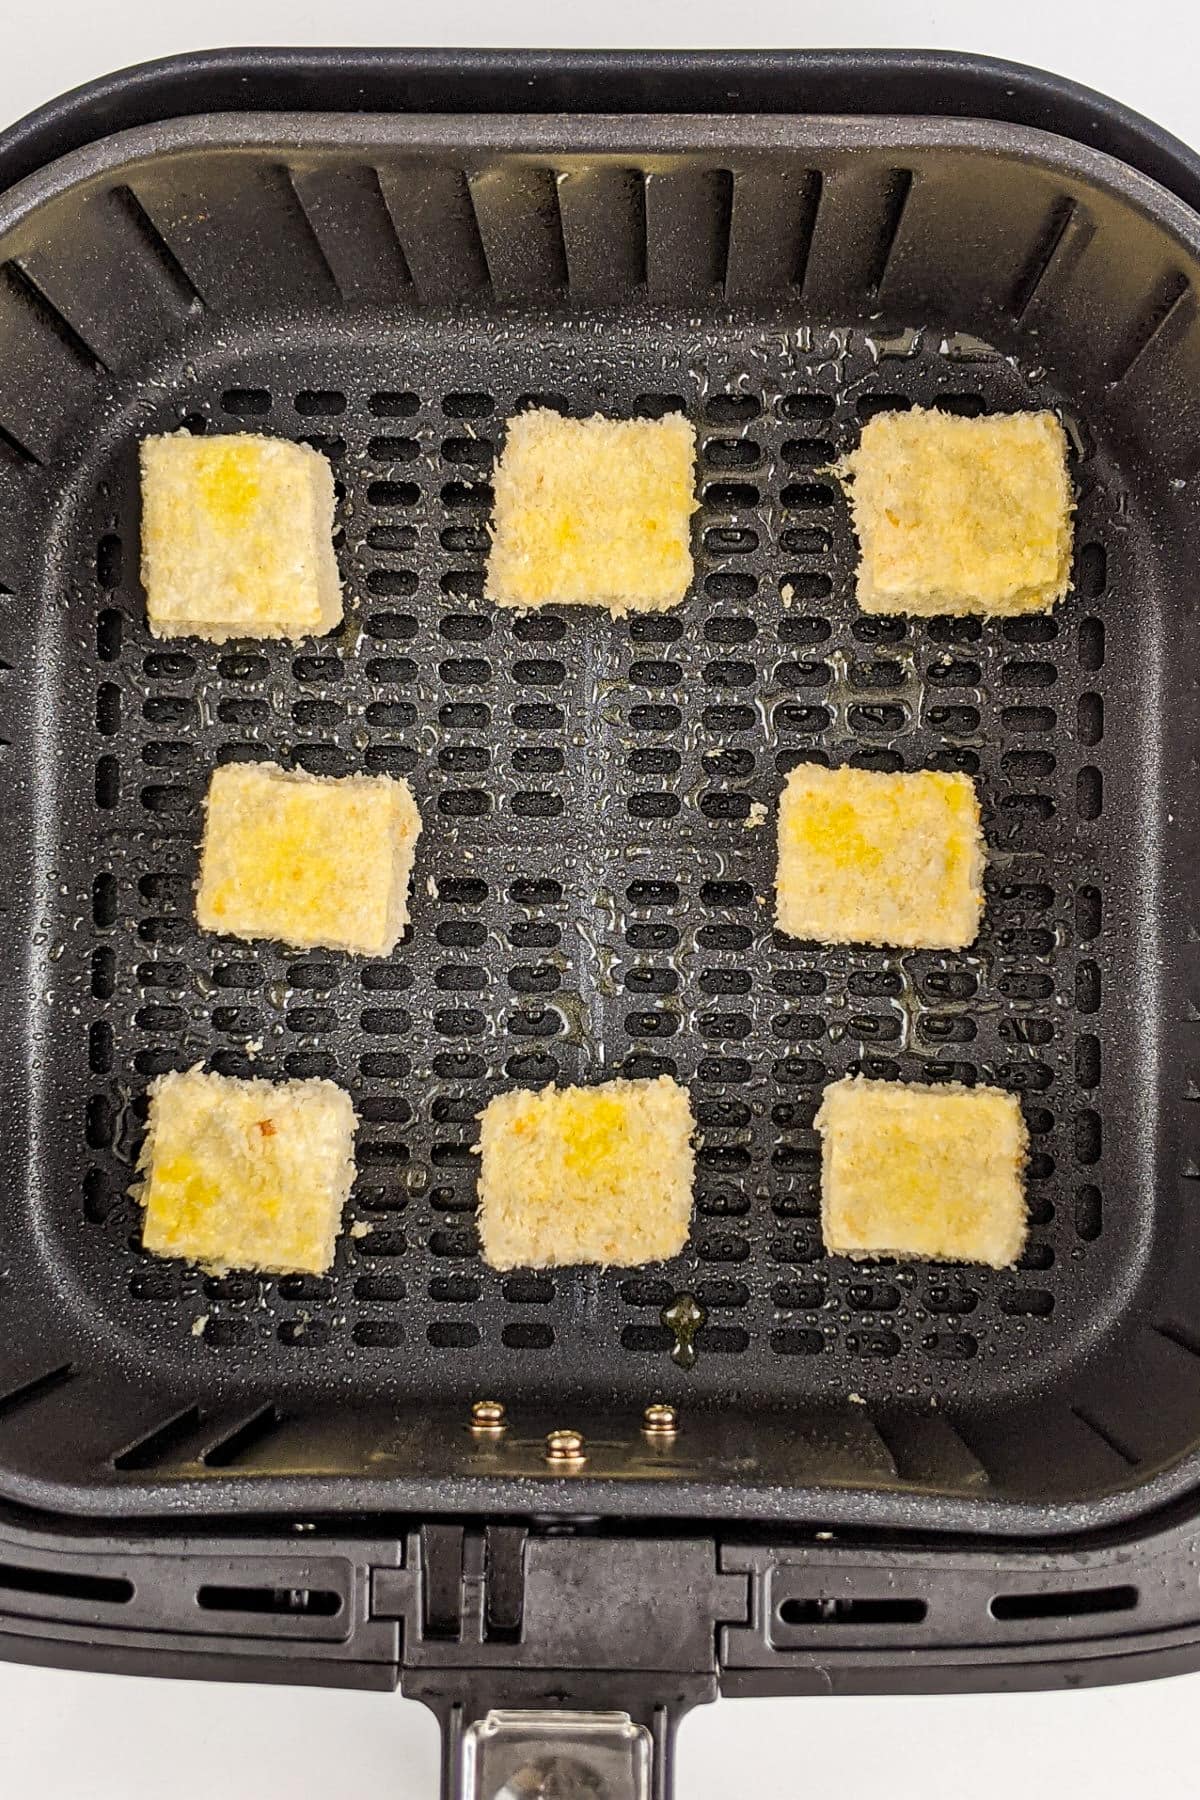 Top view of panko tofu nuggets in the air fryer basket.